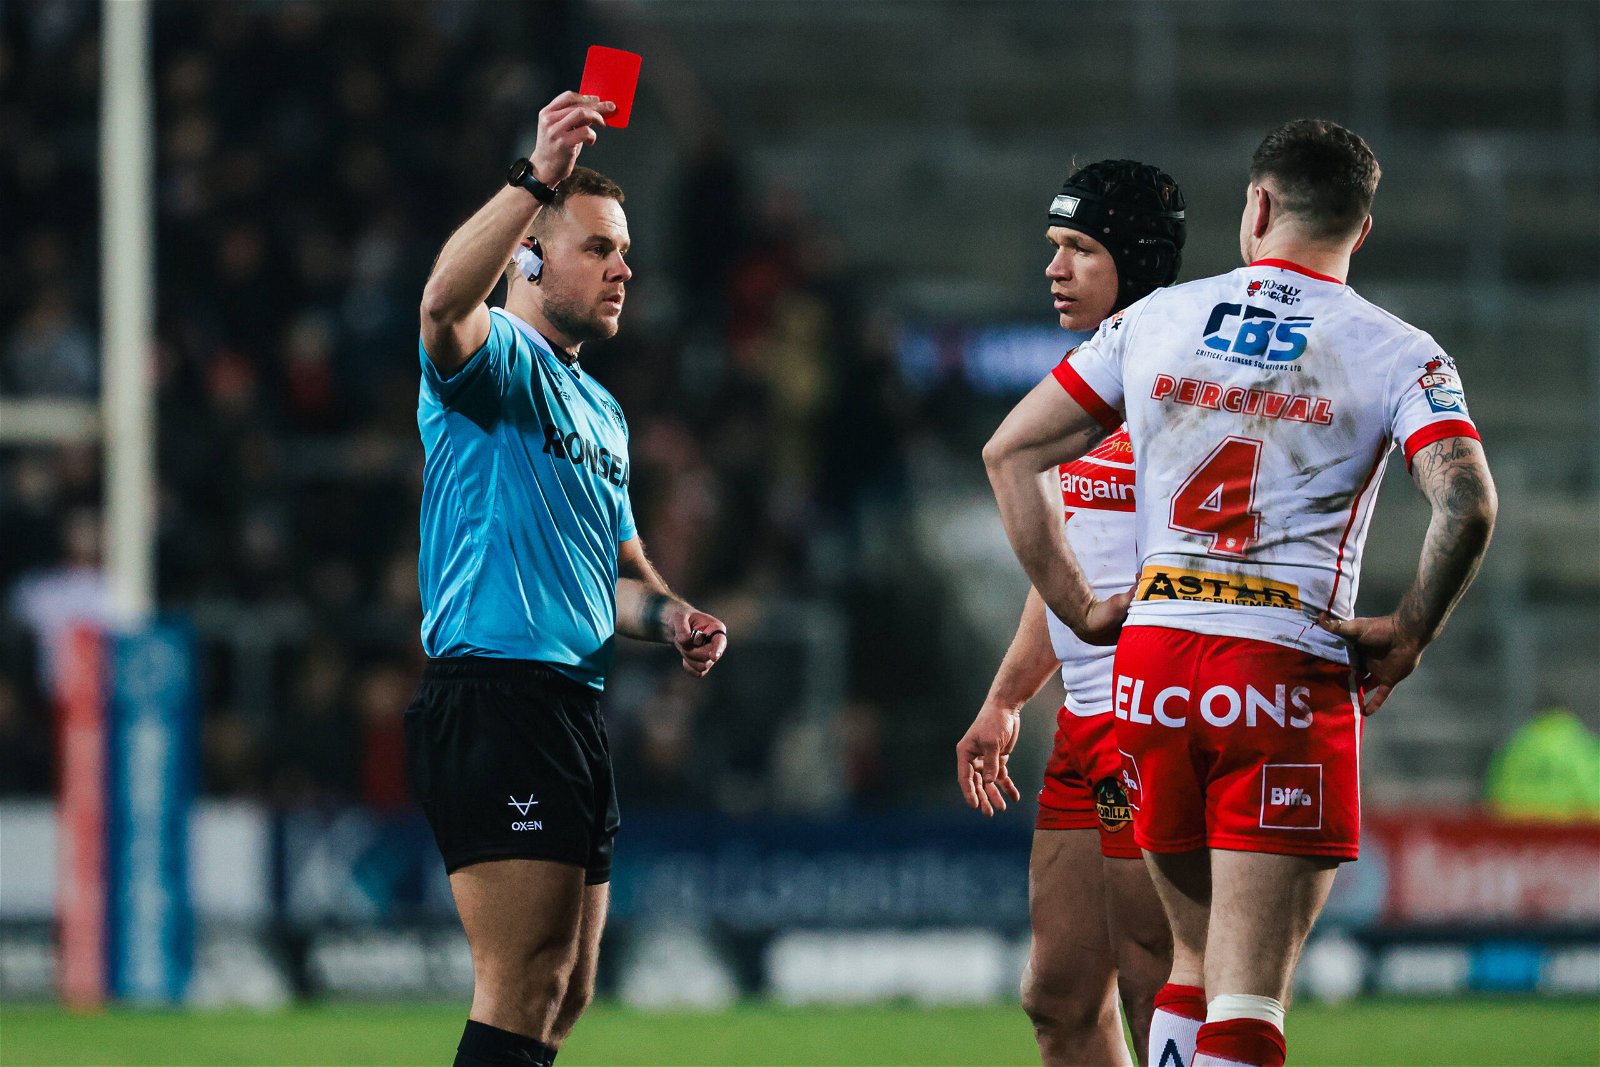 Referee Tom Grant shows St Helens star Mark Percival a red card as the new Super League disciplinary laws continue to take centre stage.